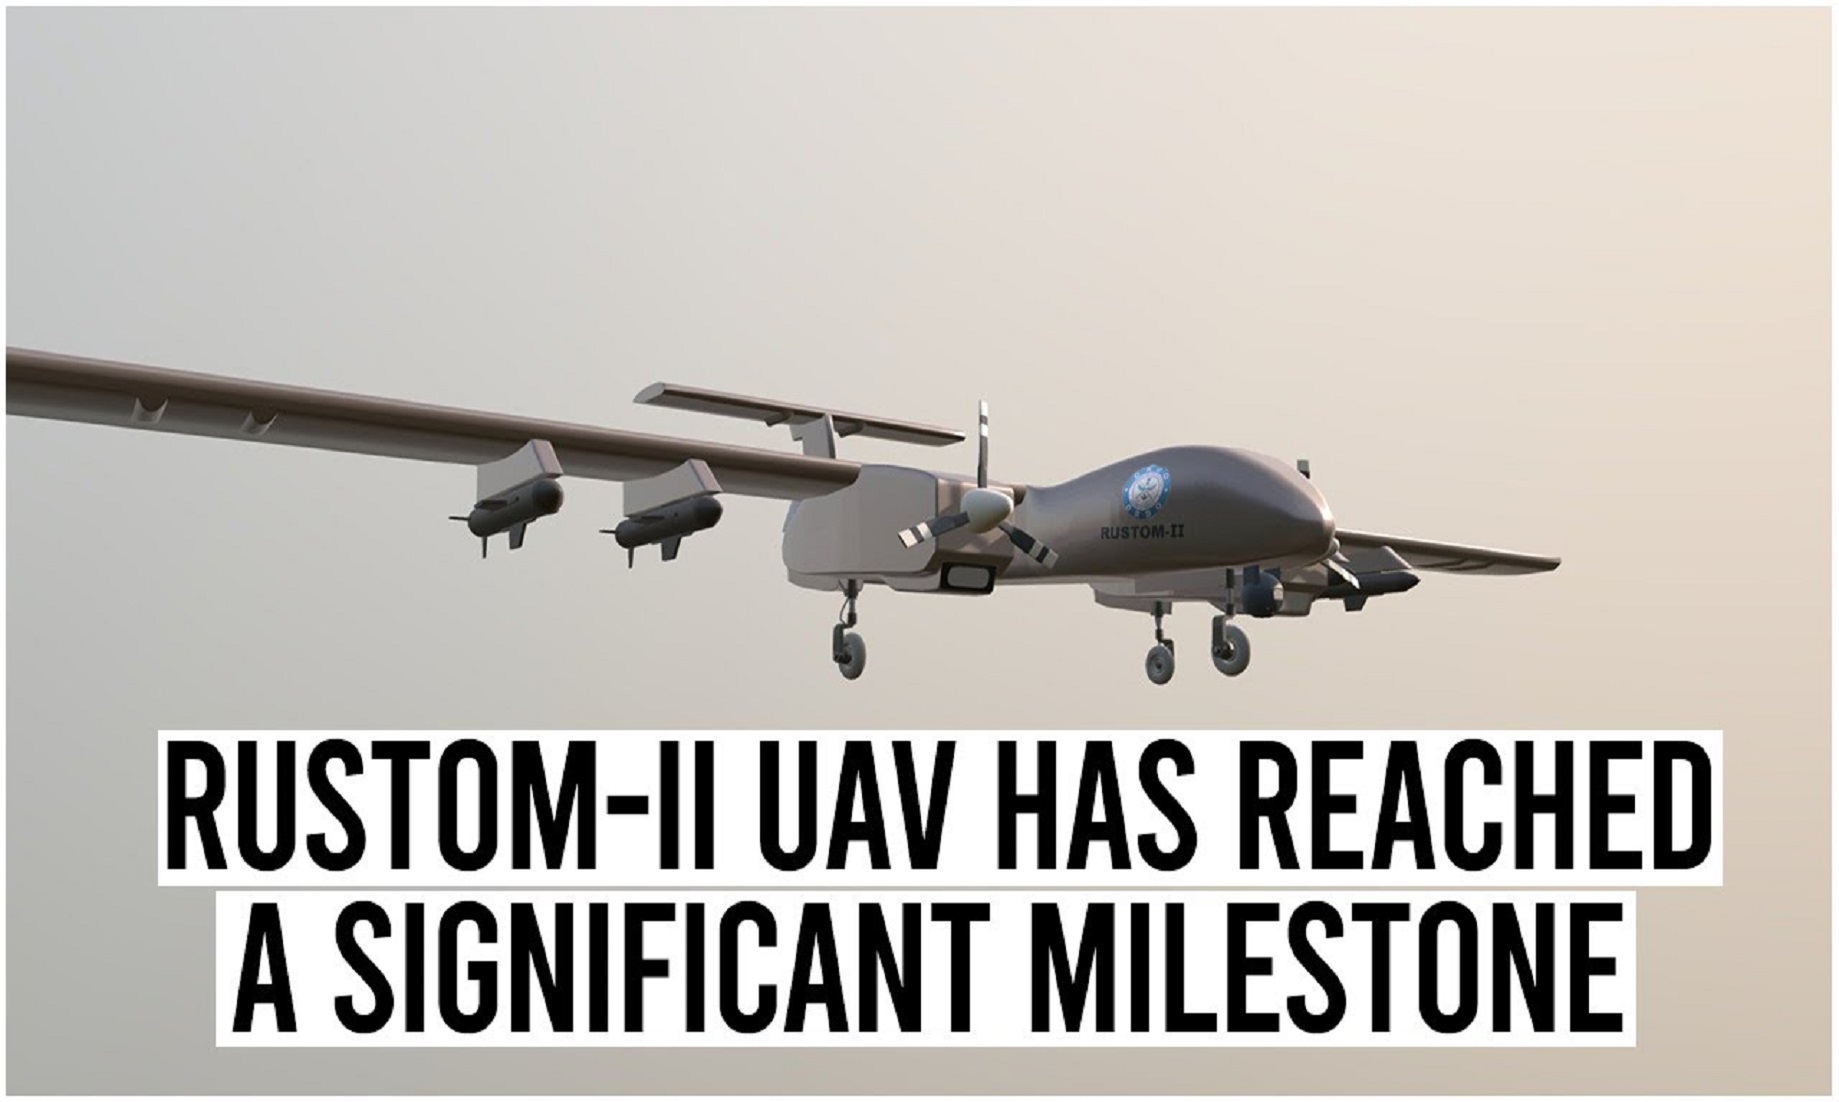 India Achieved Milestone In Developing Unmanned Aircraft